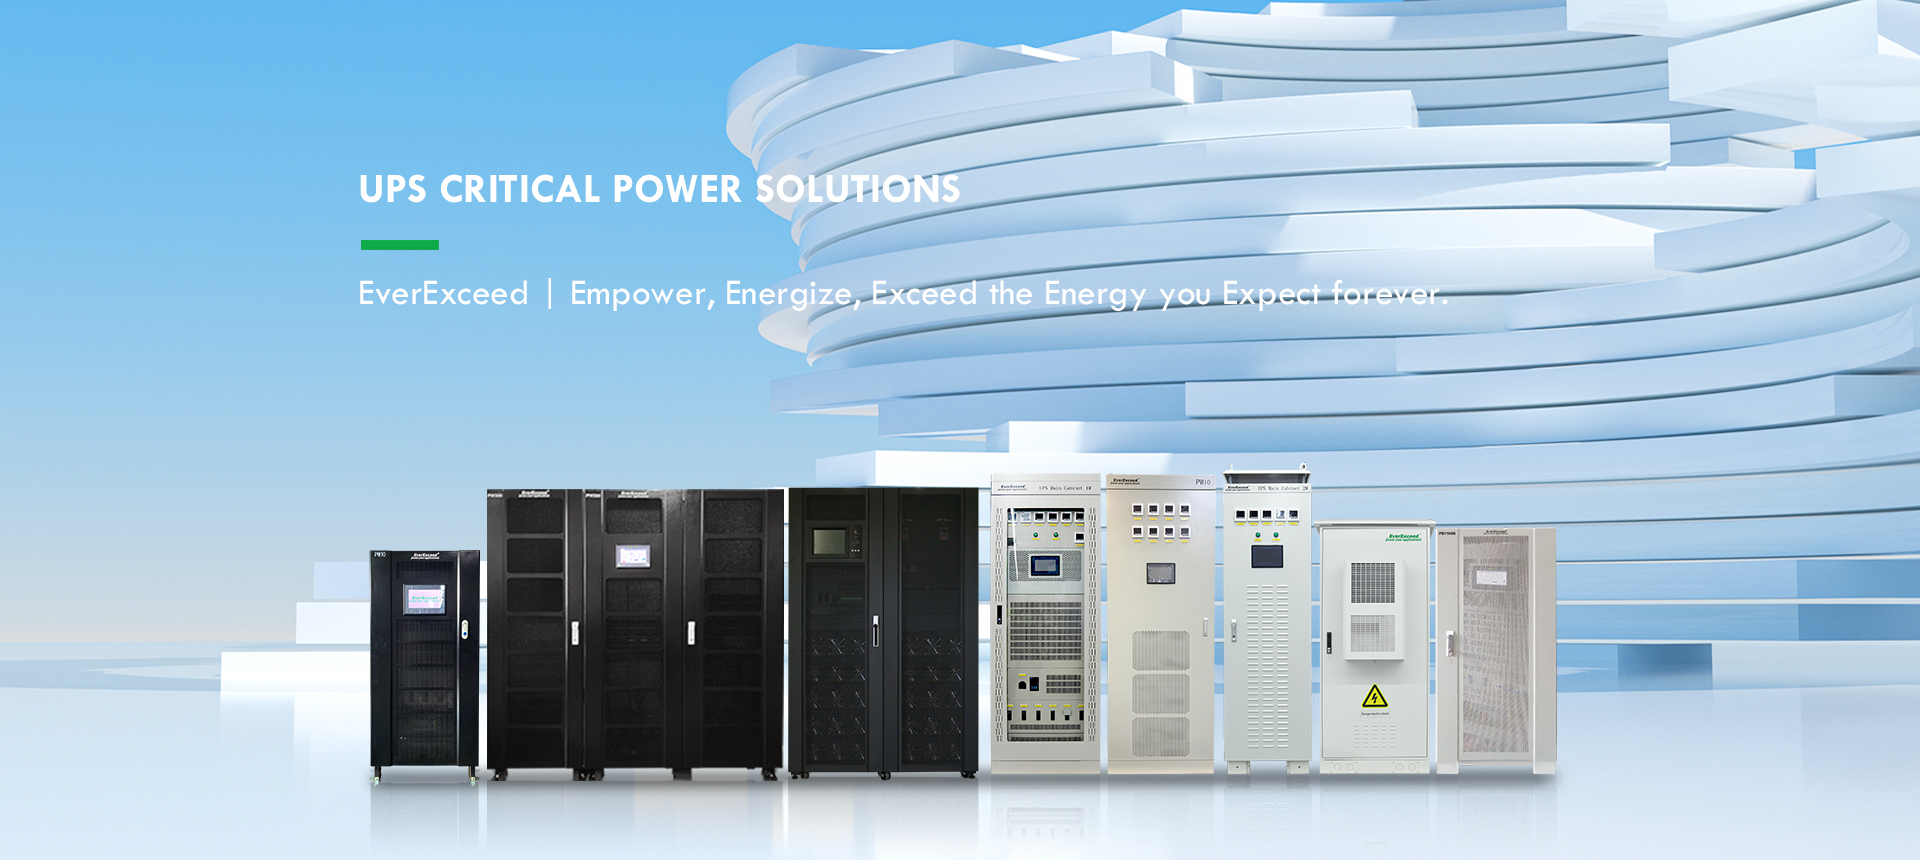 Power Supply Product-UPS Power Product